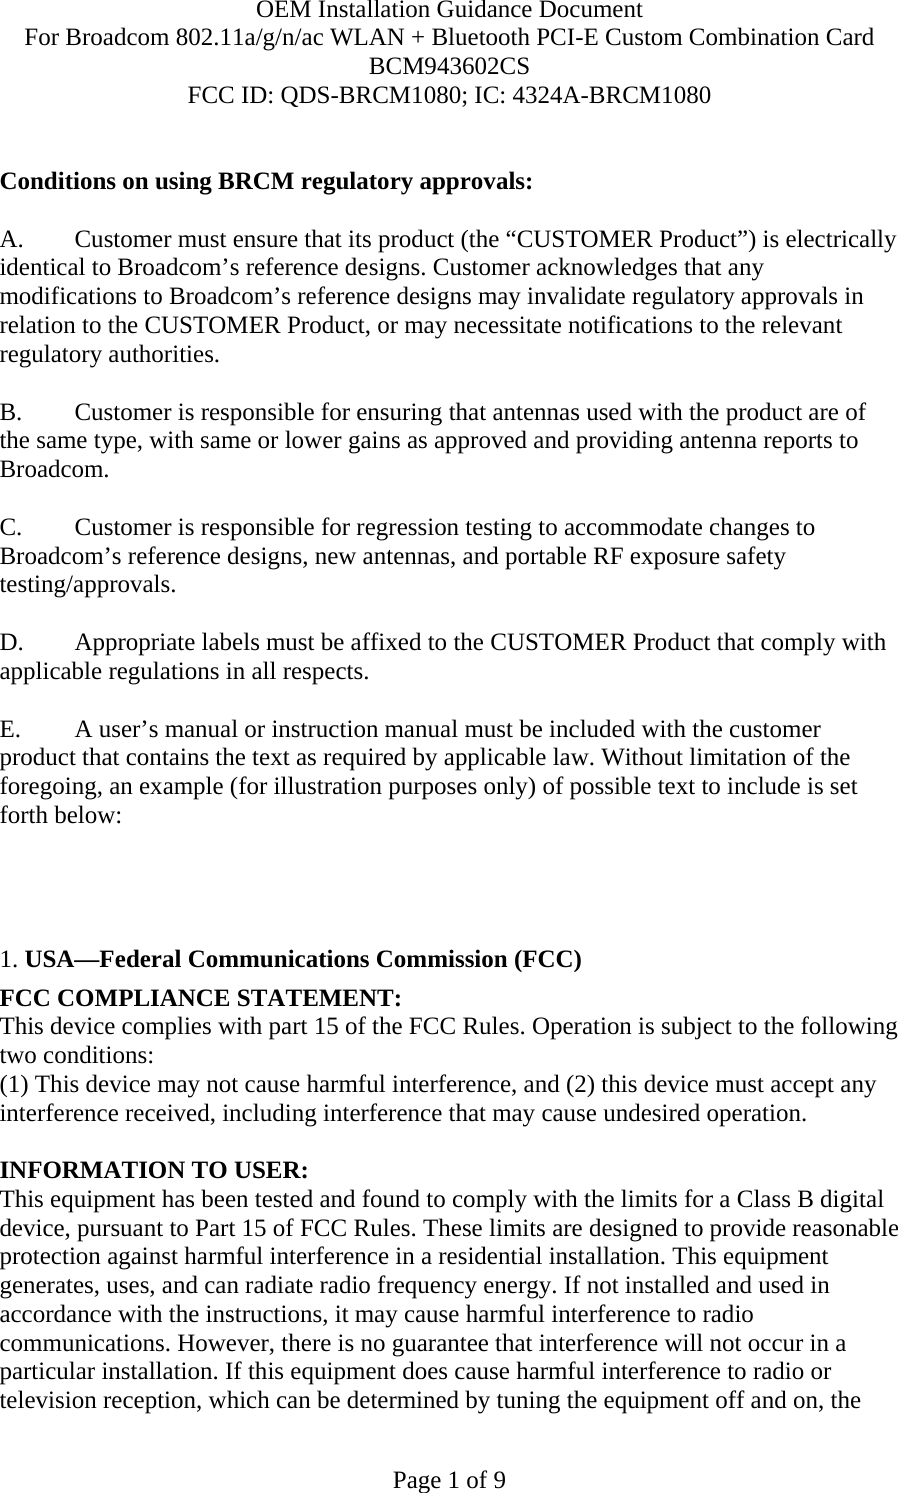 OEM Installation Guidance Document For Broadcom 802.11a/g/n/ac WLAN + Bluetooth PCI-E Custom Combination Card BCM943602CS FCC ID: QDS-BRCM1080; IC: 4324A-BRCM1080  Page 1 of 9  Conditions on using BRCM regulatory approvals:   A.  Customer must ensure that its product (the “CUSTOMER Product”) is electrically identical to Broadcom’s reference designs. Customer acknowledges that any modifications to Broadcom’s reference designs may invalidate regulatory approvals in relation to the CUSTOMER Product, or may necessitate notifications to the relevant regulatory authorities.  B.   Customer is responsible for ensuring that antennas used with the product are of the same type, with same or lower gains as approved and providing antenna reports to Broadcom.  C.   Customer is responsible for regression testing to accommodate changes to Broadcom’s reference designs, new antennas, and portable RF exposure safety testing/approvals.  D.  Appropriate labels must be affixed to the CUSTOMER Product that comply with applicable regulations in all respects.    E.  A user’s manual or instruction manual must be included with the customer product that contains the text as required by applicable law. Without limitation of the foregoing, an example (for illustration purposes only) of possible text to include is set forth below:       1. USA—Federal Communications Commission (FCC) FCC COMPLIANCE STATEMENT: This device complies with part 15 of the FCC Rules. Operation is subject to the following two conditions: (1) This device may not cause harmful interference, and (2) this device must accept any interference received, including interference that may cause undesired operation.  INFORMATION TO USER: This equipment has been tested and found to comply with the limits for a Class B digital device, pursuant to Part 15 of FCC Rules. These limits are designed to provide reasonable protection against harmful interference in a residential installation. This equipment generates, uses, and can radiate radio frequency energy. If not installed and used in accordance with the instructions, it may cause harmful interference to radio communications. However, there is no guarantee that interference will not occur in a particular installation. If this equipment does cause harmful interference to radio or television reception, which can be determined by tuning the equipment off and on, the 